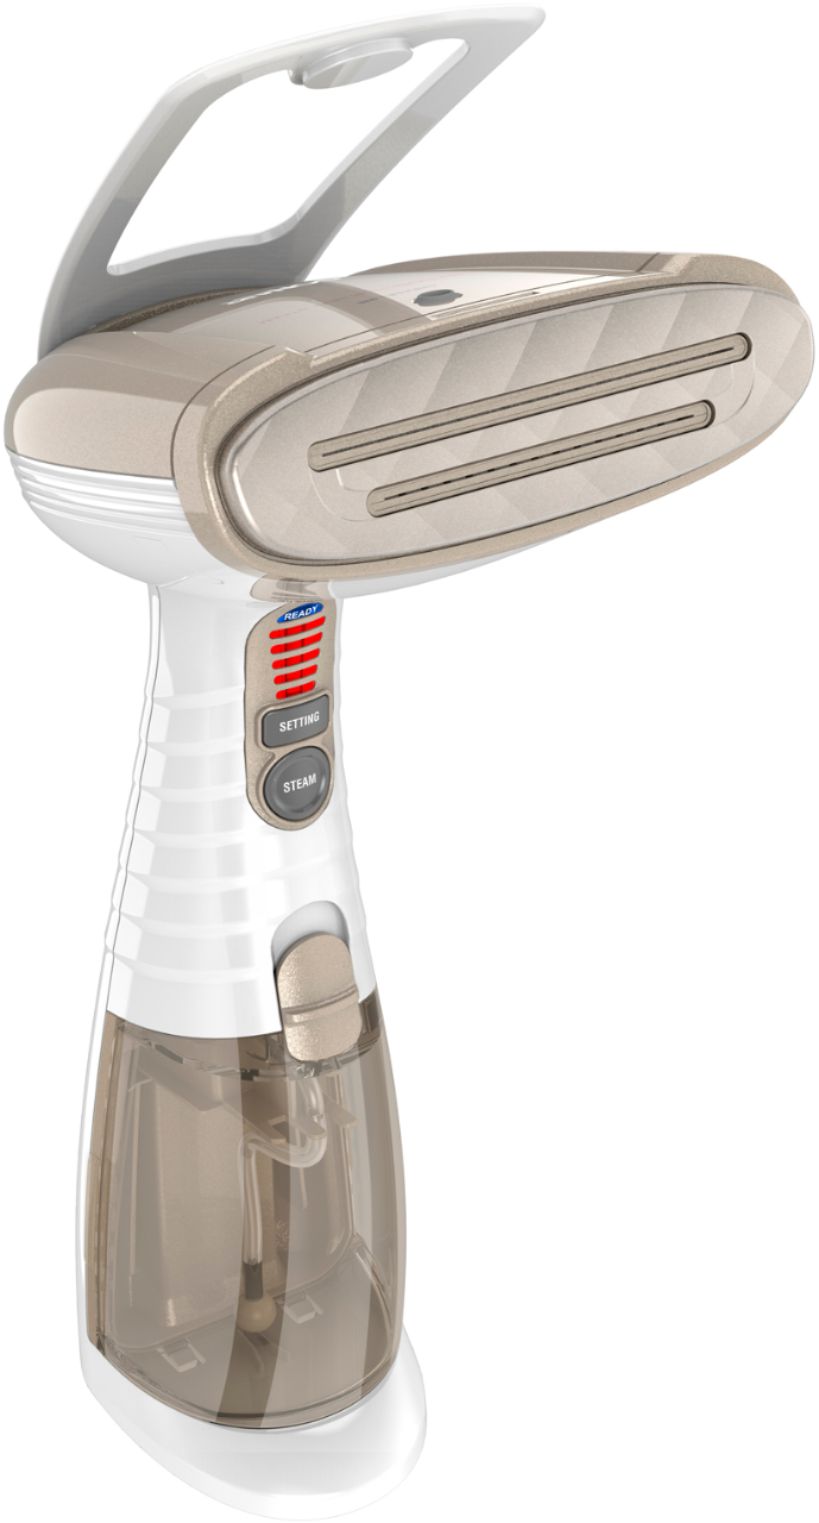 Angle View: Conair - Turbo ExtremeSteam Handheld Fabric Steamer - Brown